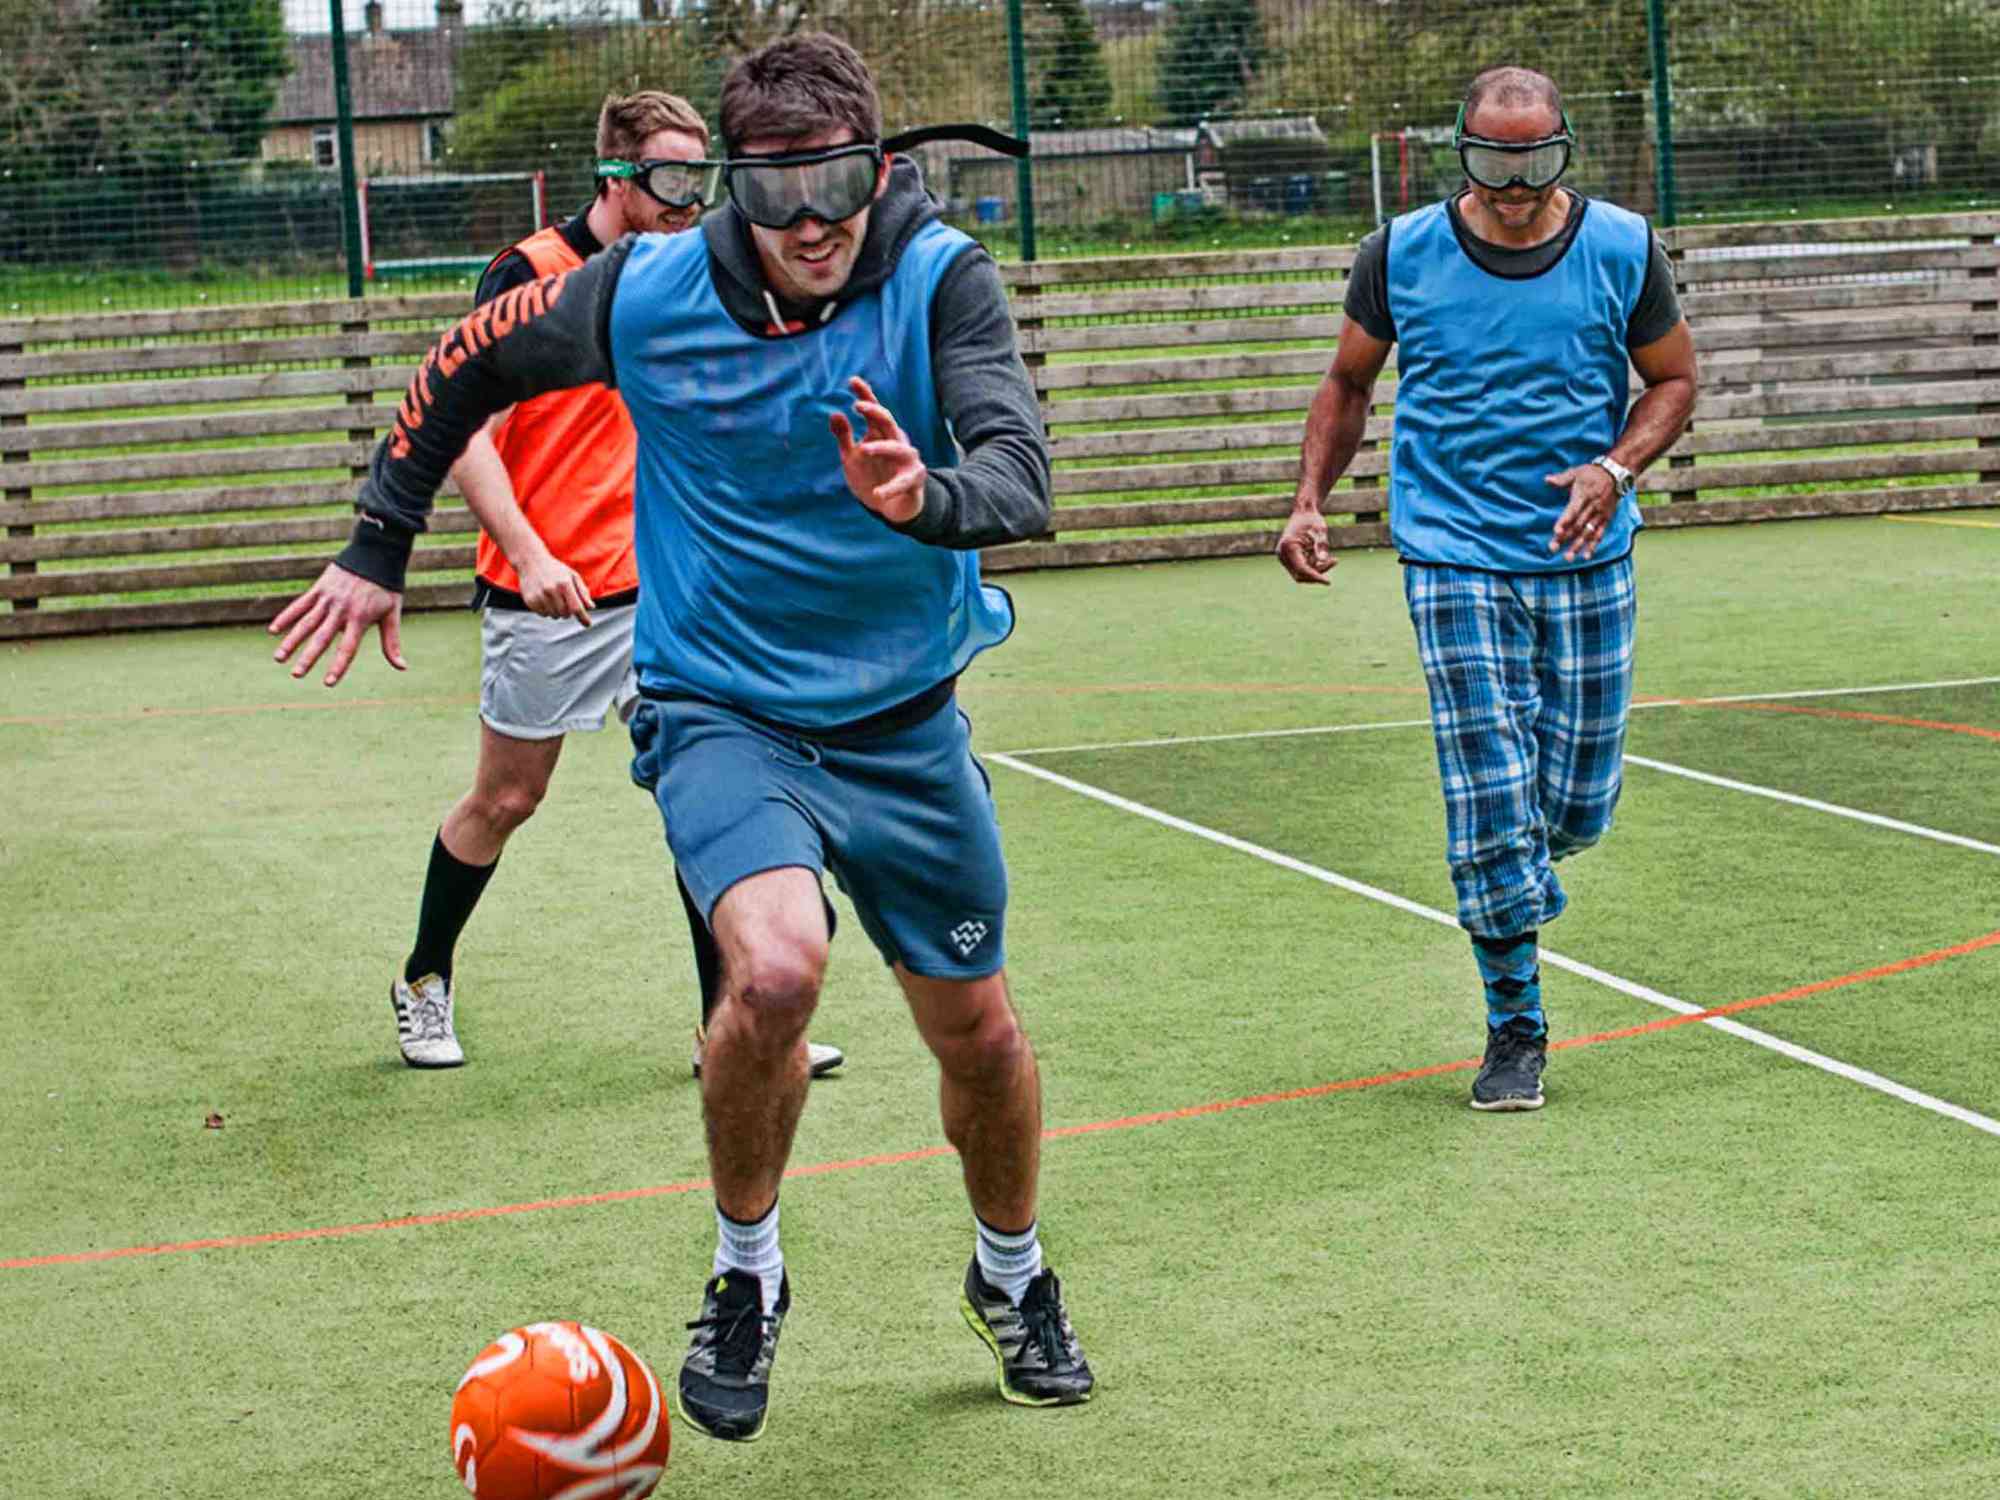 Cheap Stag Do Ideas in London - Goggle Football